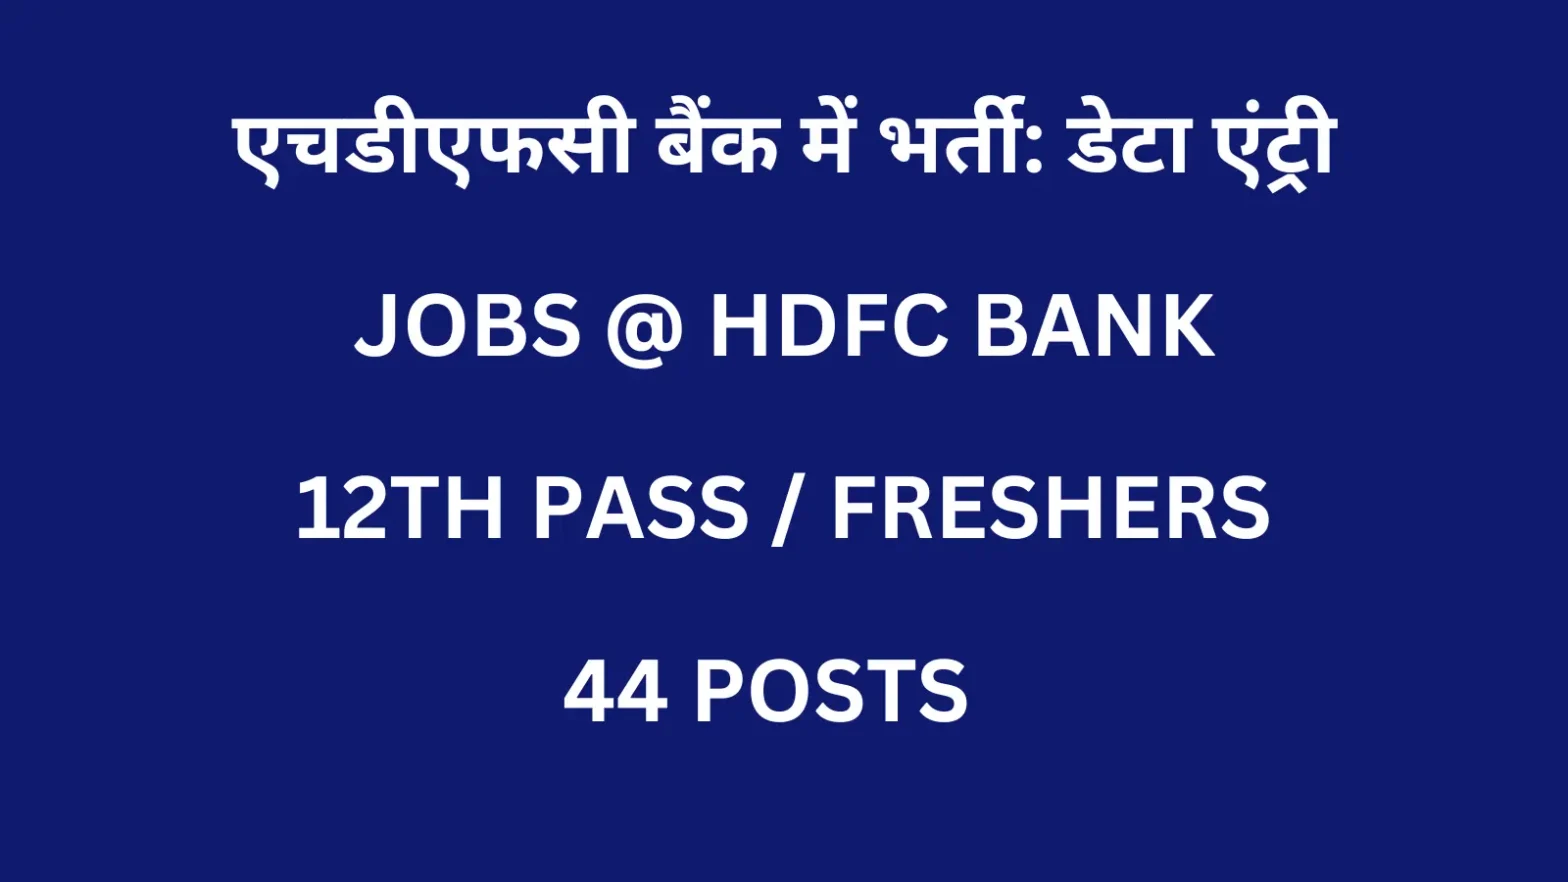 JOBS FOR 12TH PASS - HDFC BANK.